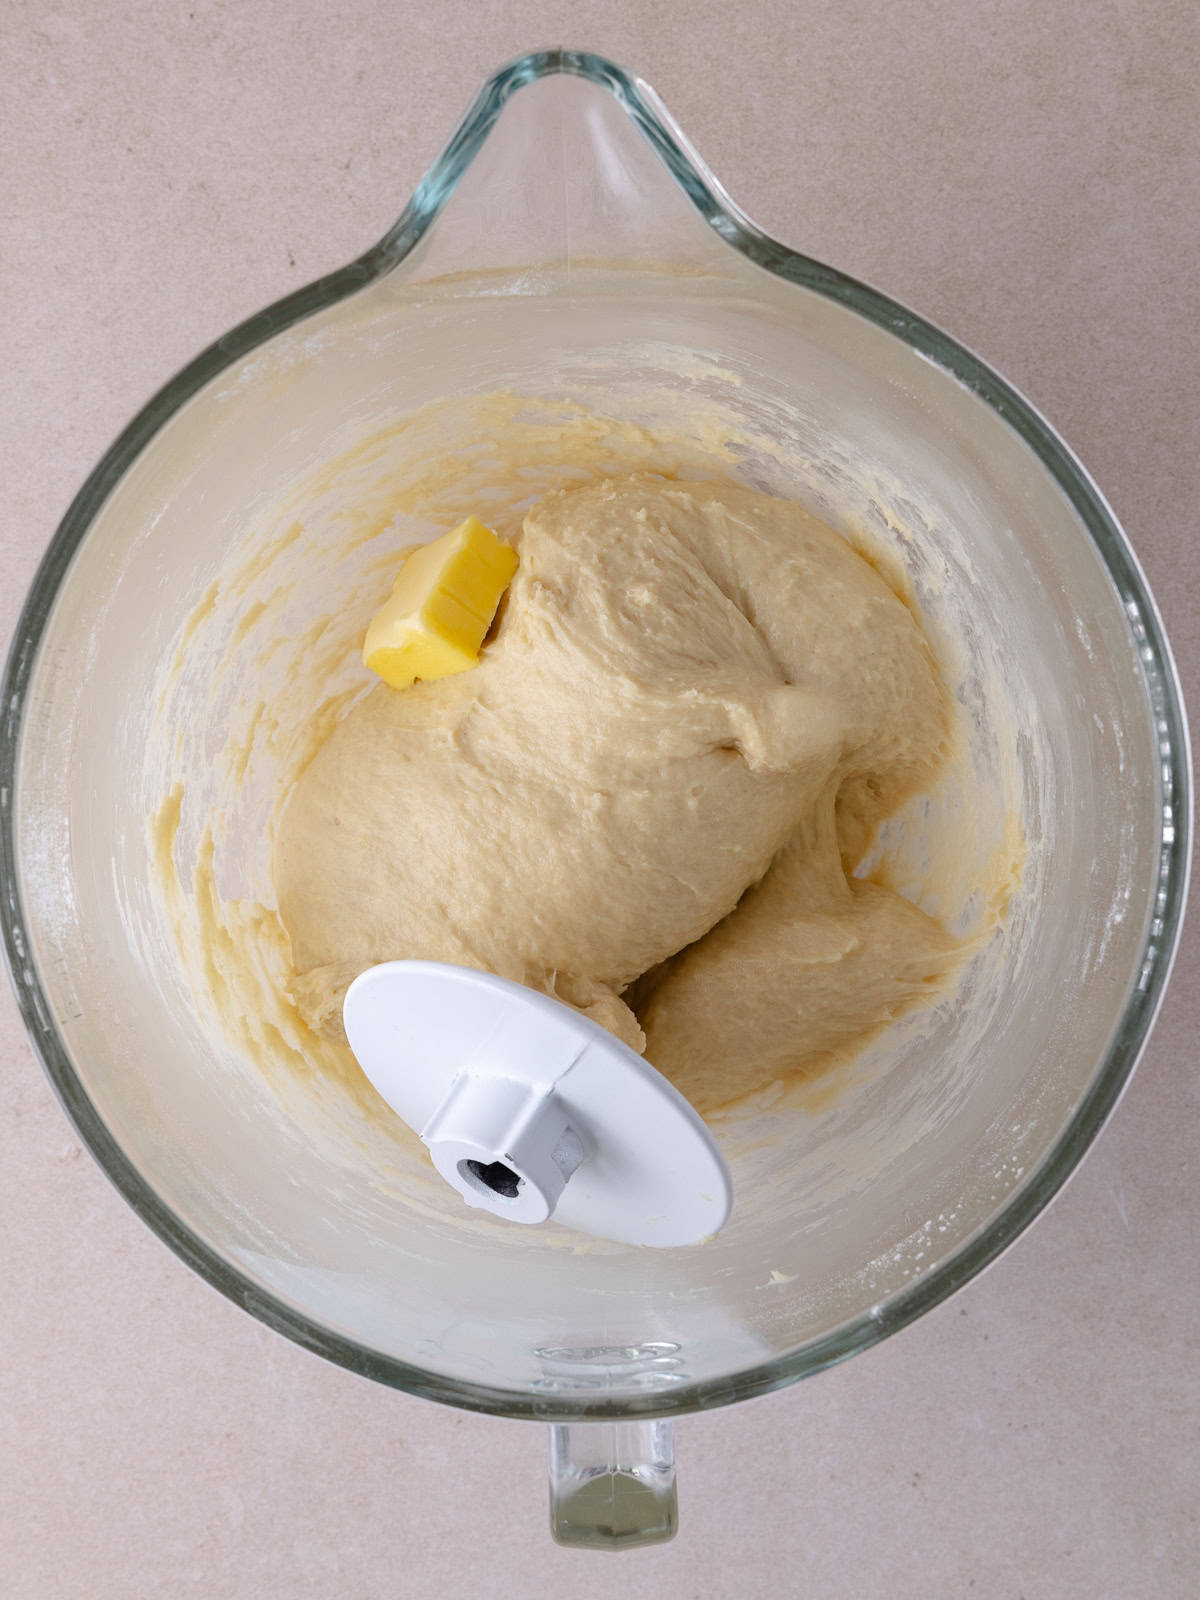 A tablespoon of softened butter is added to the dough after it has been kneaded for 5 minutes.